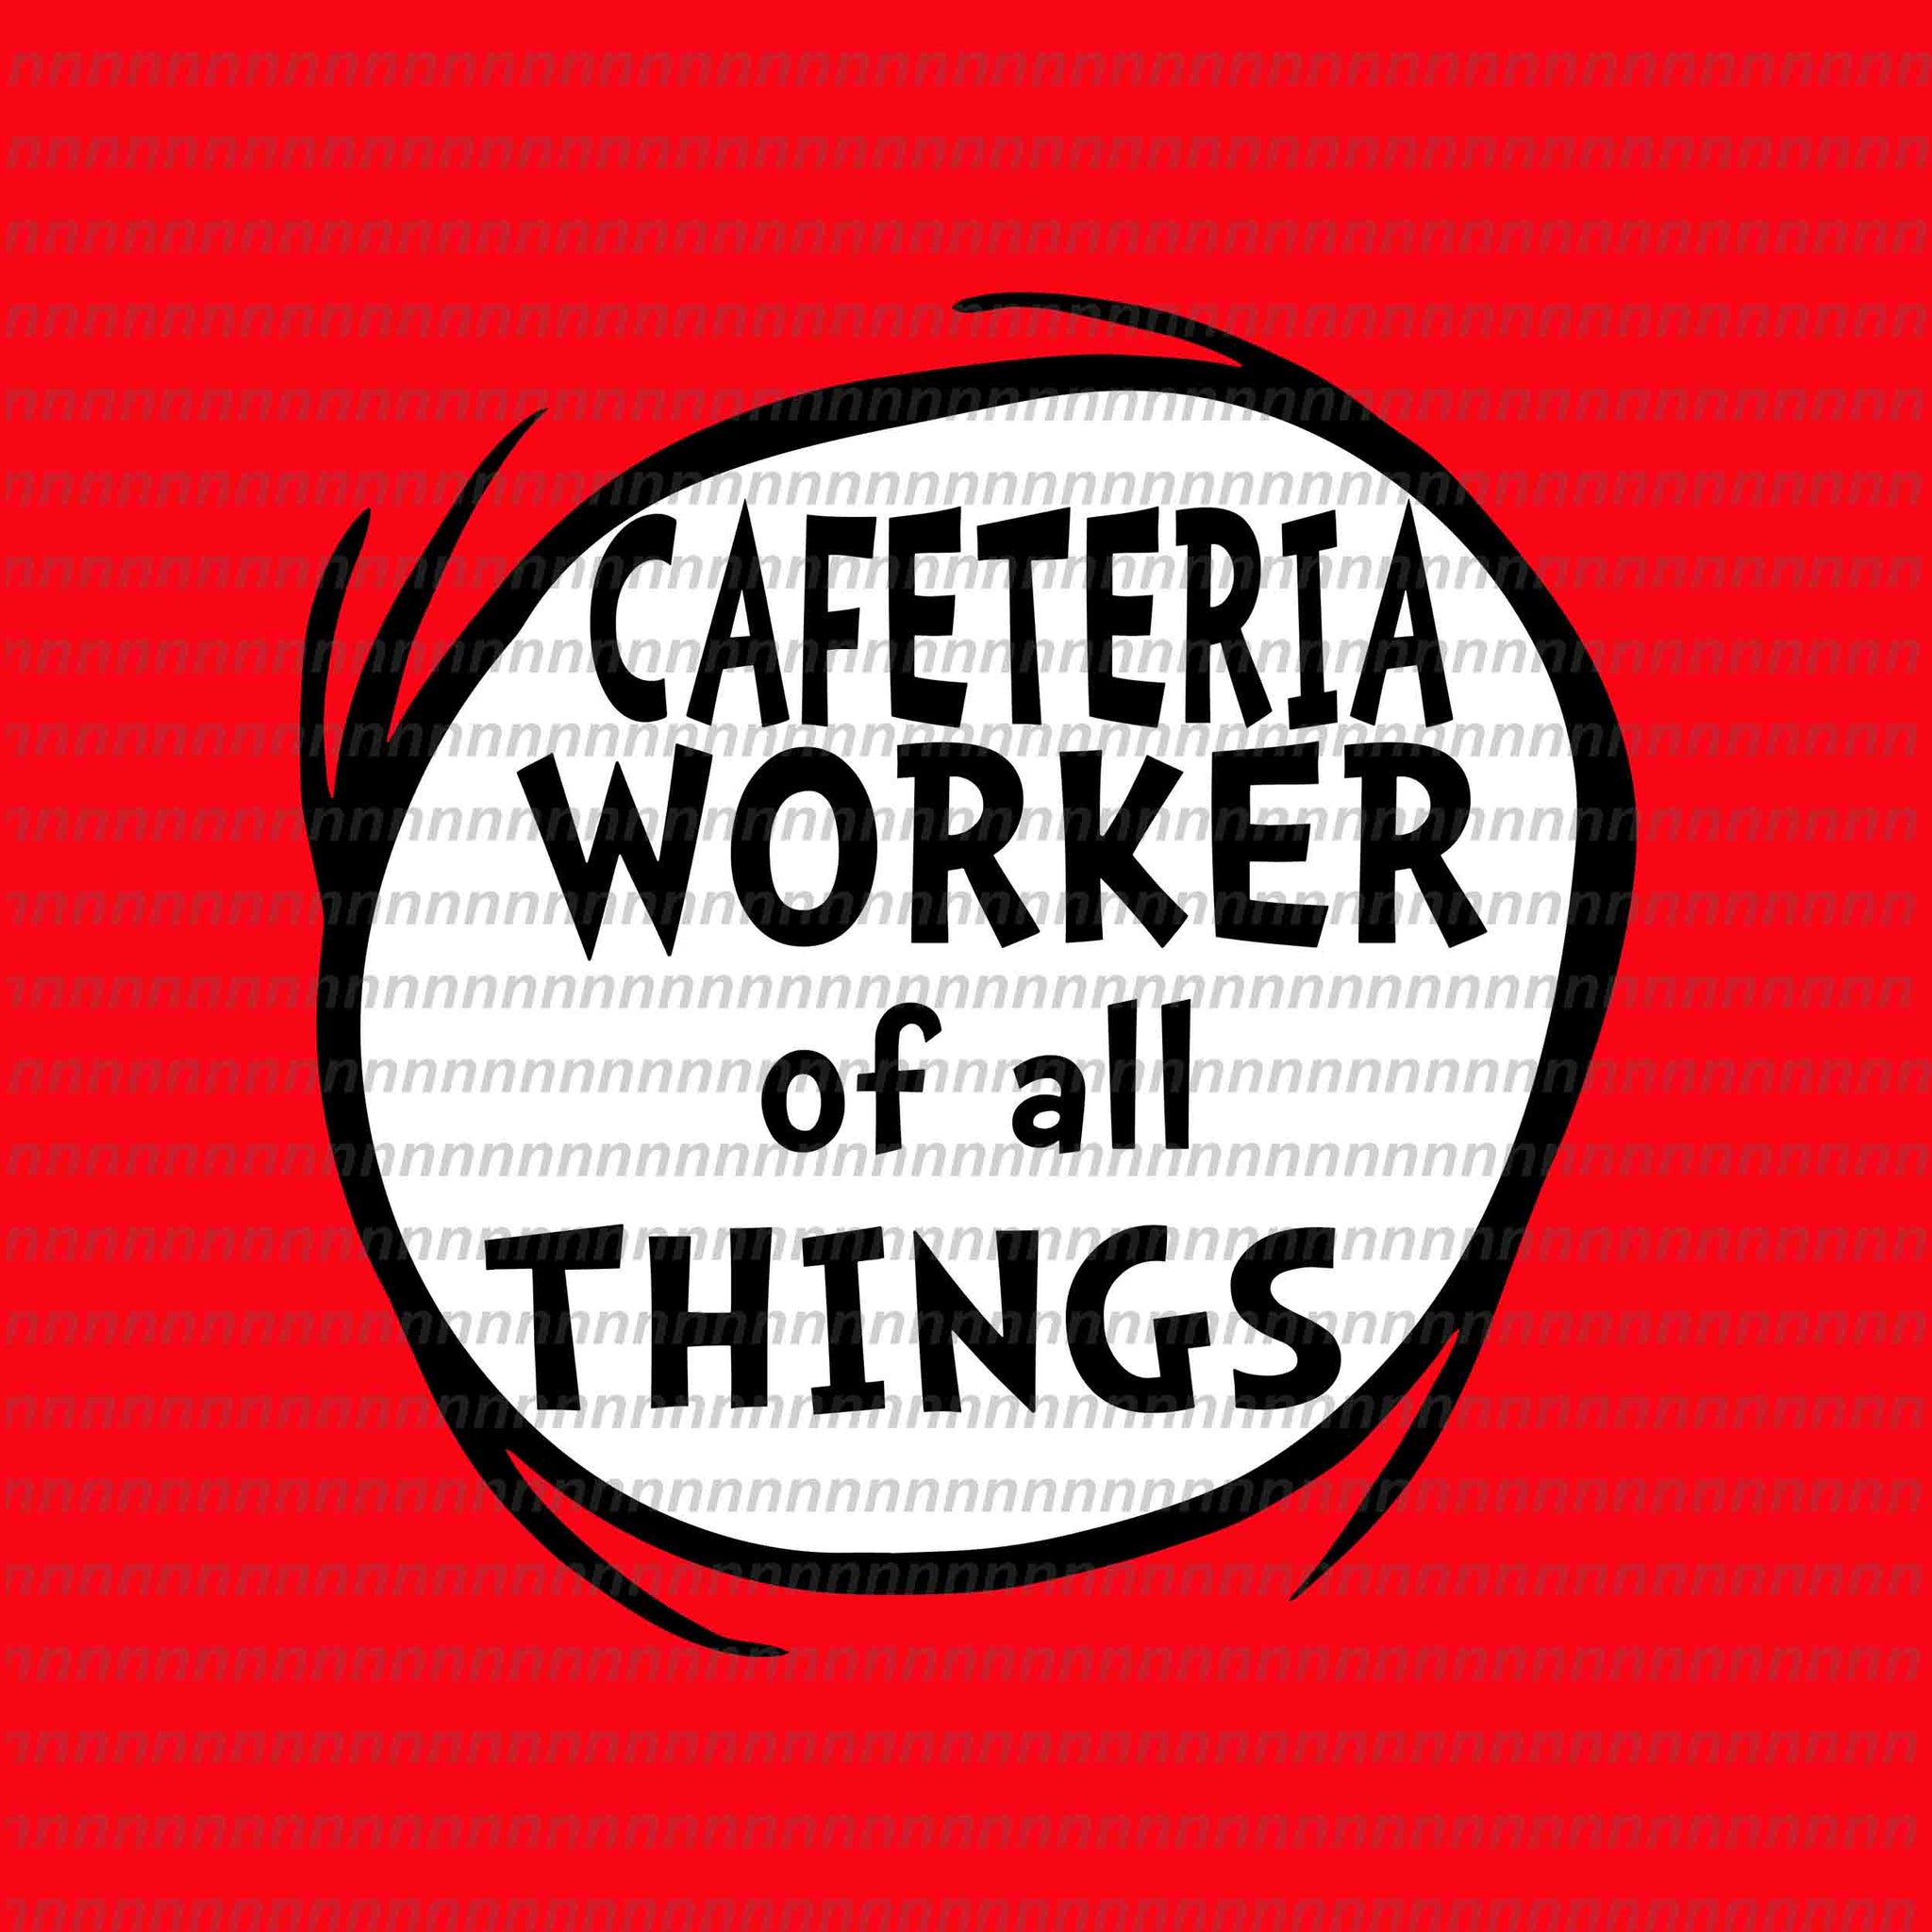 Cafeteria worker of all things, dr seuss svg,dr seuss vector, dr seuss quote, dr seuss design, Cat in the hat svg, thing 1 thing 2 thing 3, svg, png, dxf, eps file